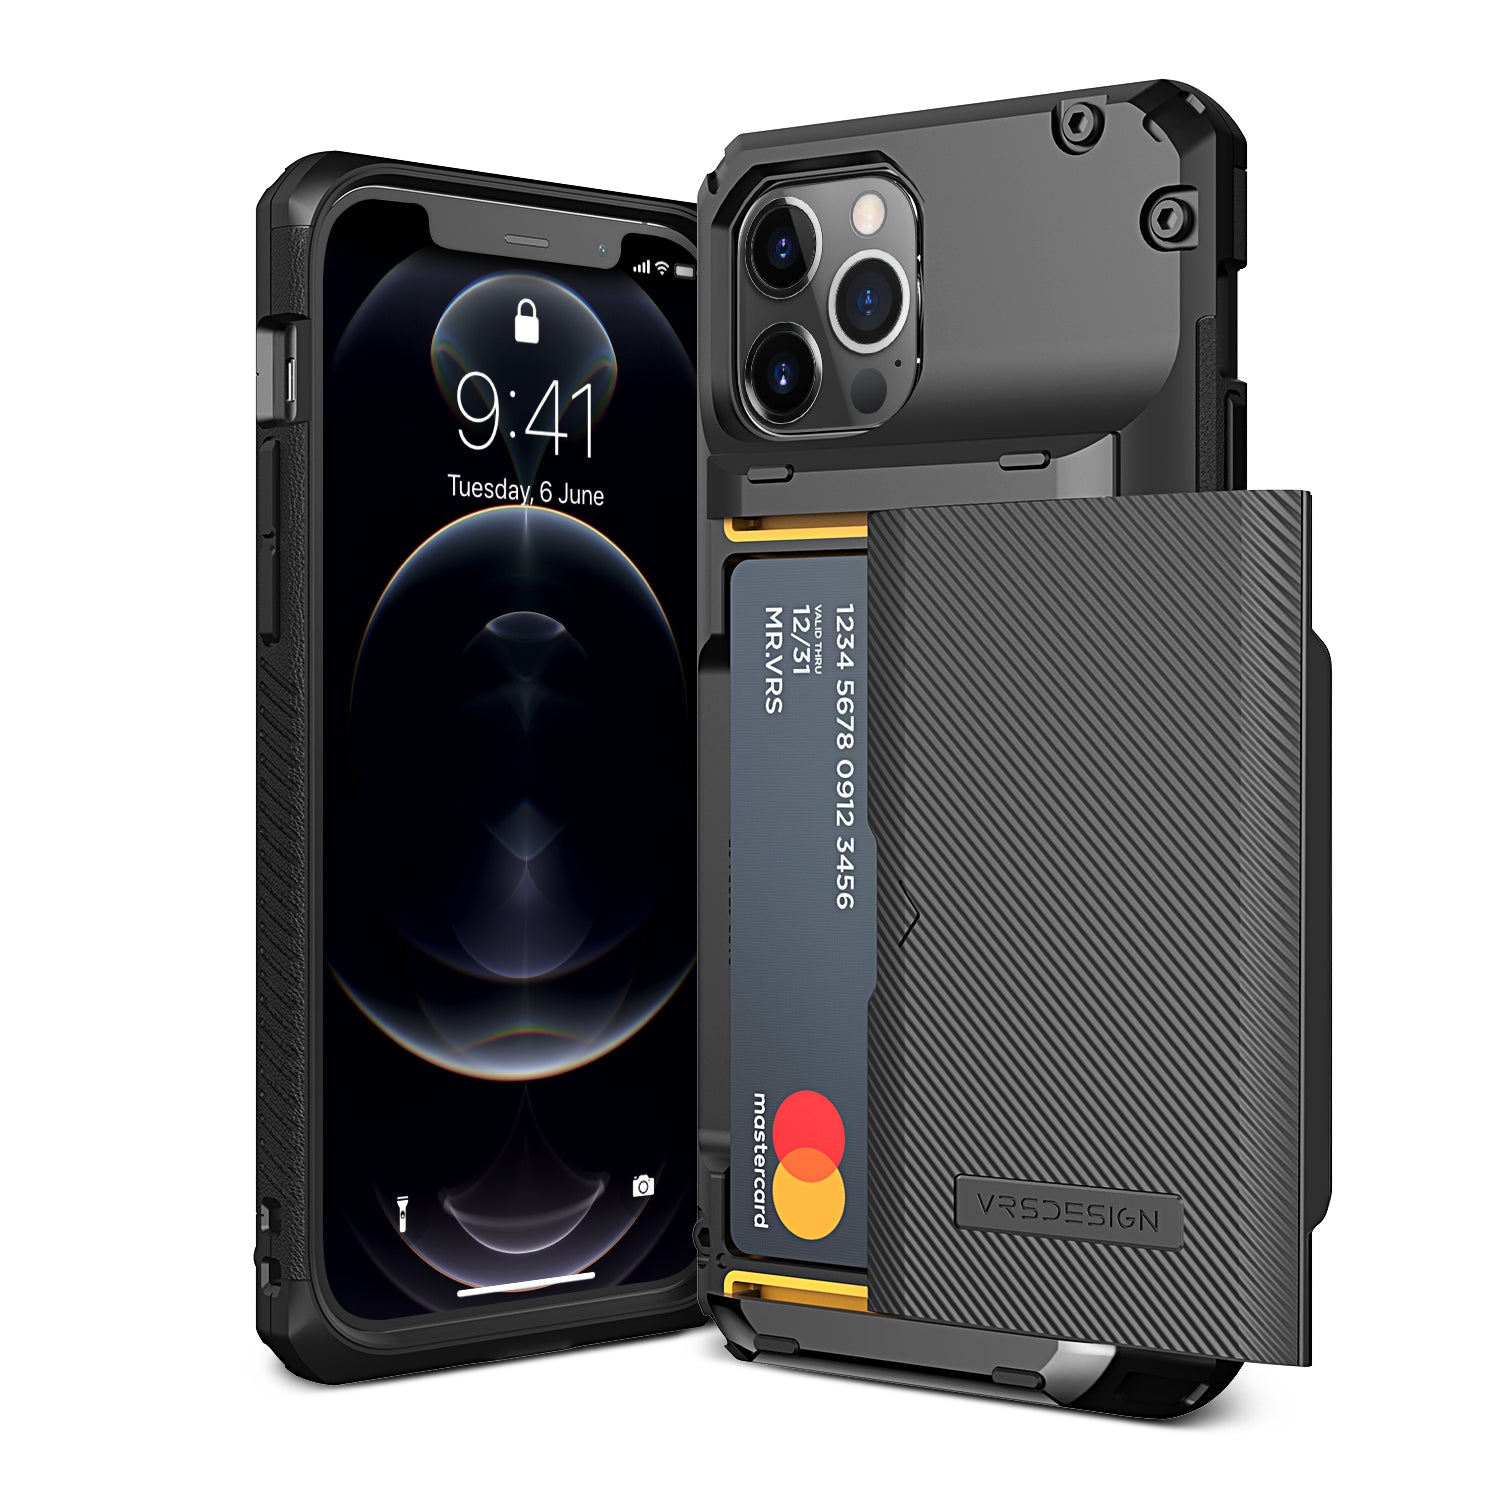 Rugged modern Apple iPhone 12 Pro Max case Glide Hybrid by VRS